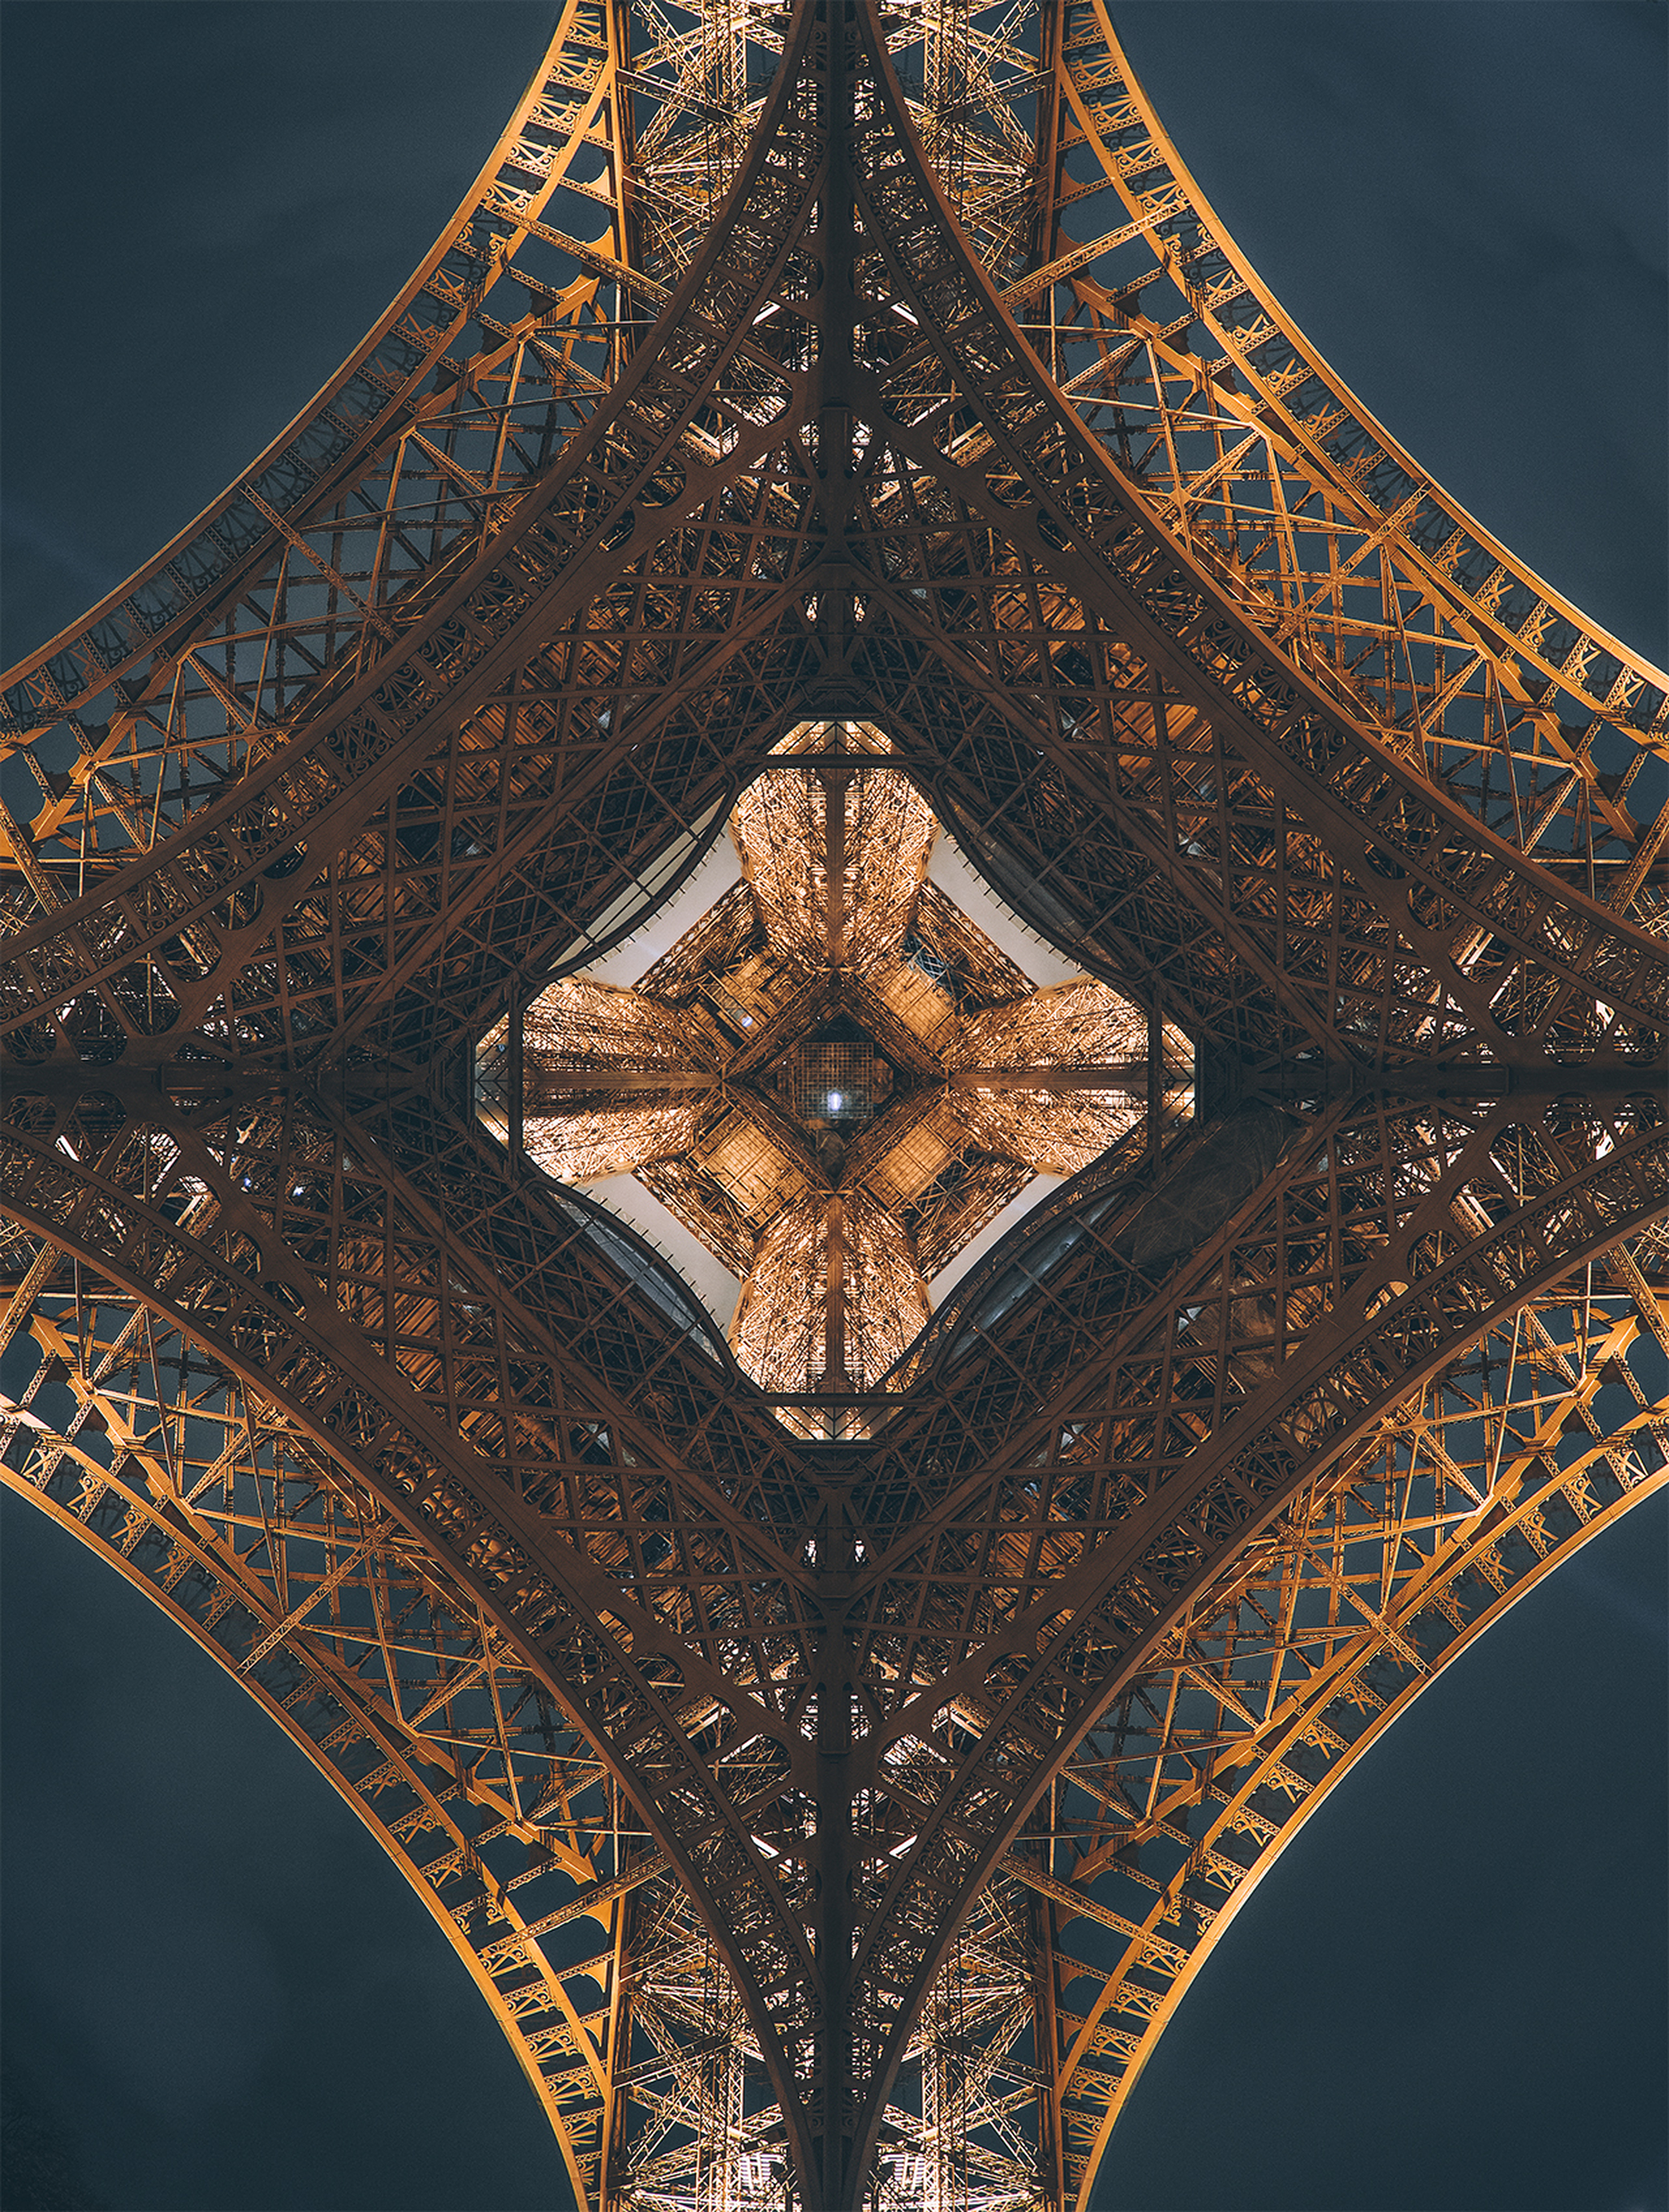 Symmetry of the Eiffel Tower